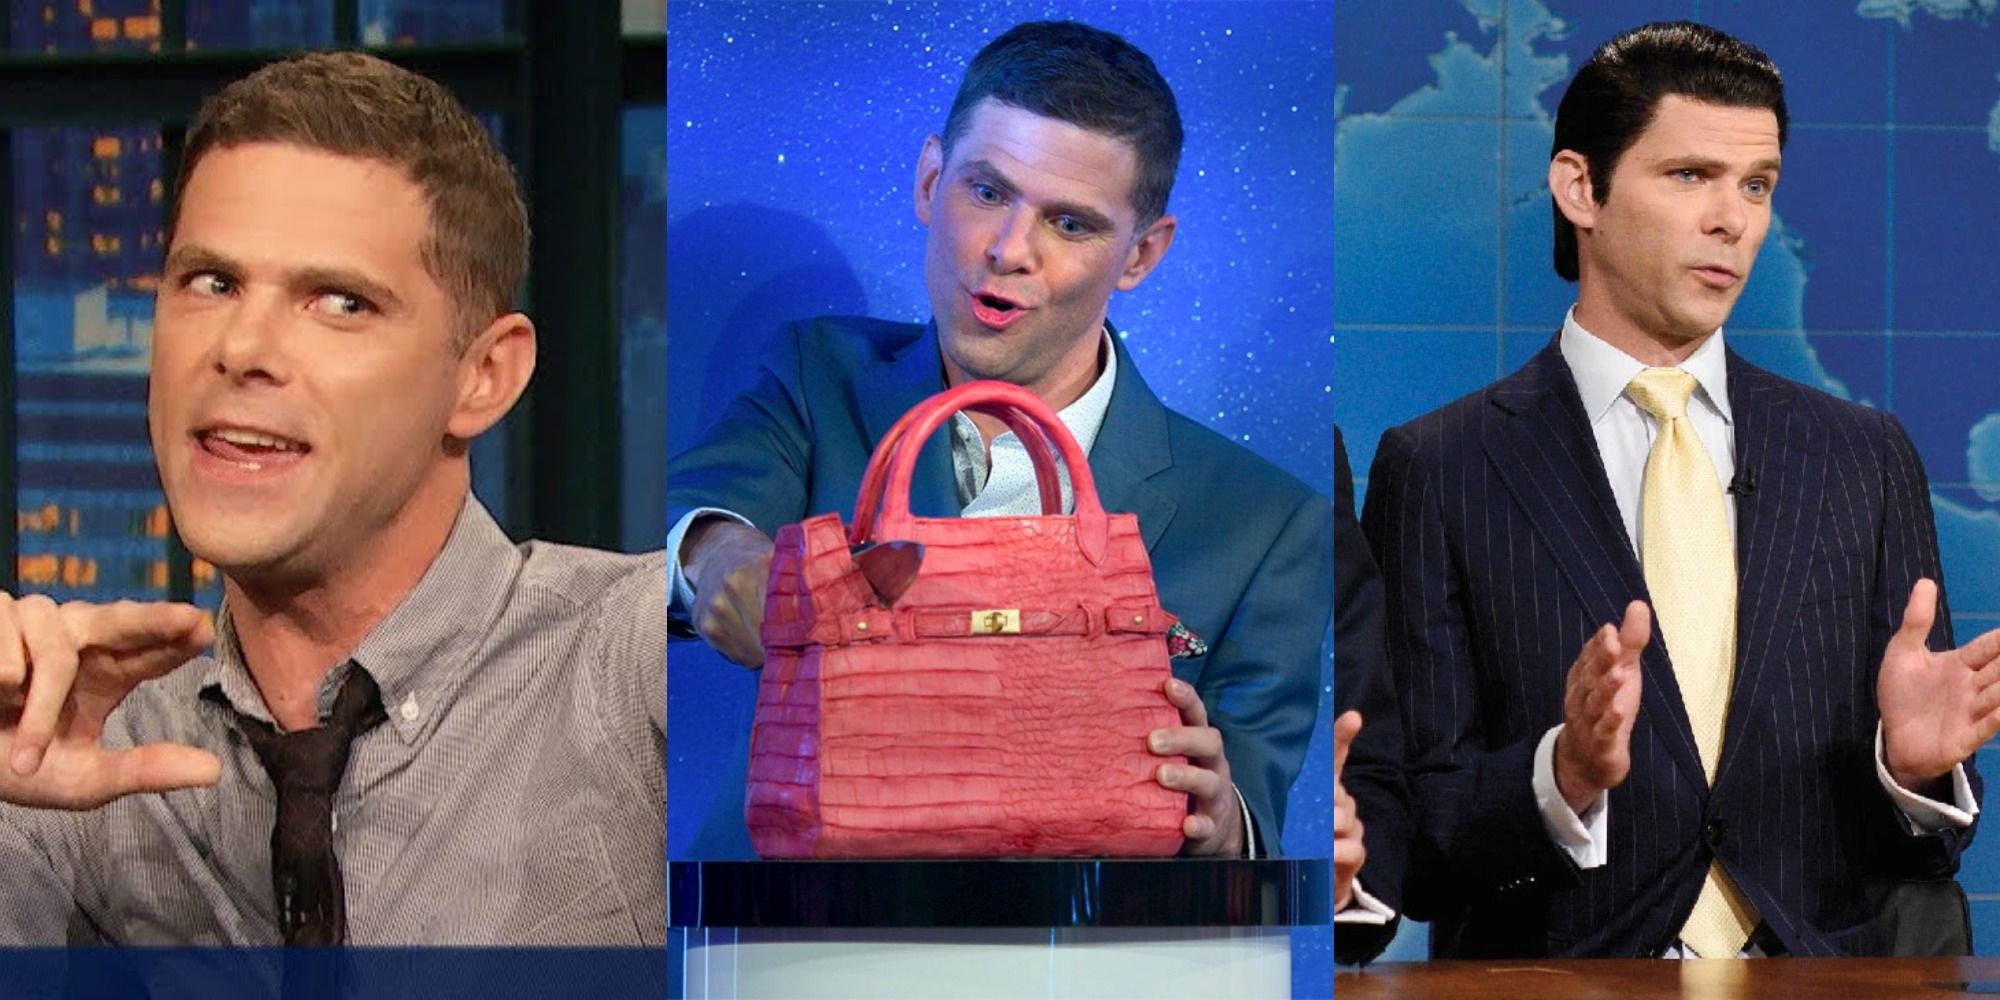 Three images of Mikey Day on TV